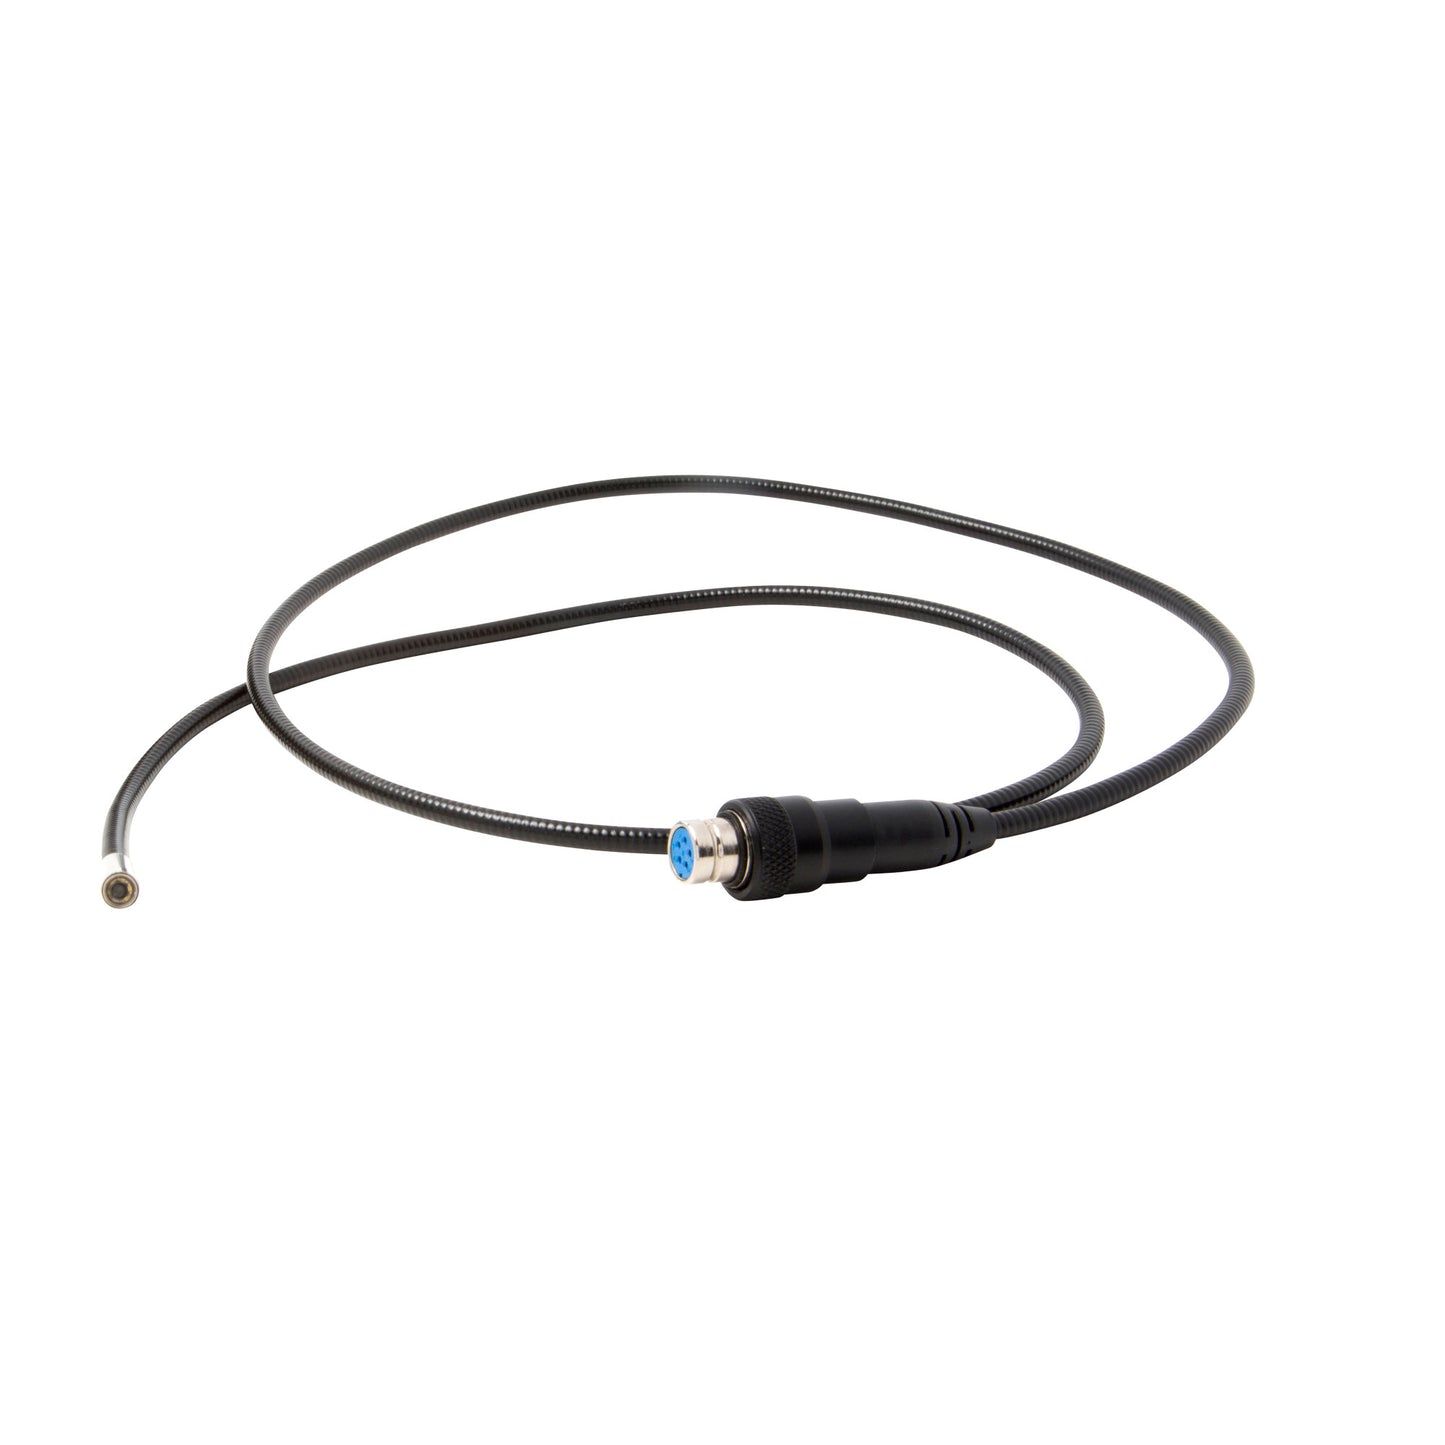 3-Foot x 5.5mm Replacement Video Scope Camera Probe